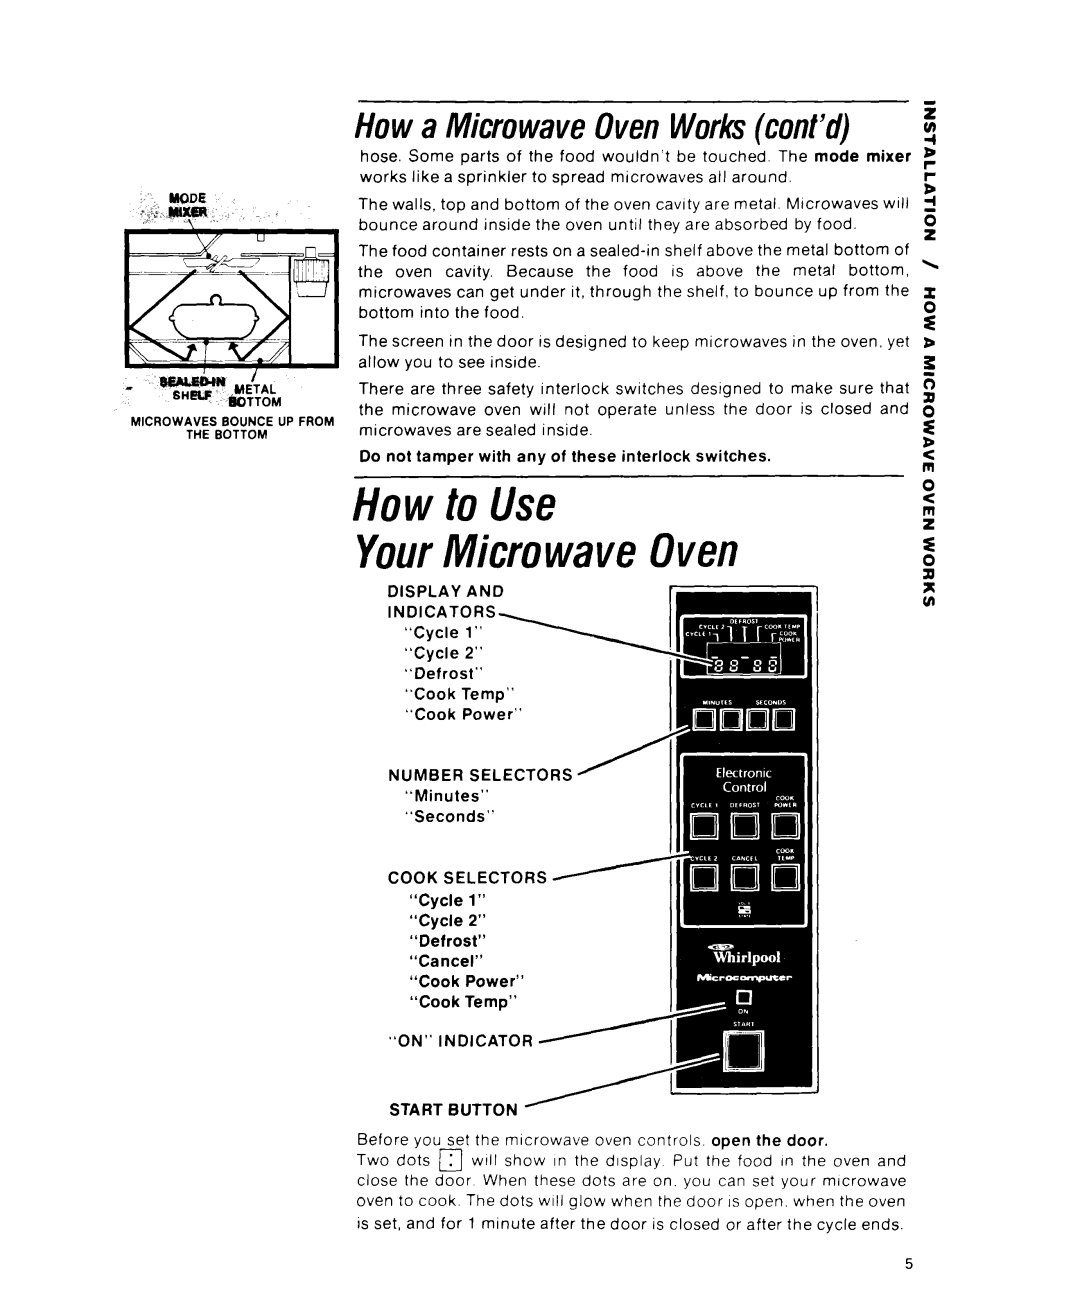 Whirlpool RJM 1870, RJM 7700 manual How to Use YourMicrowave Oven, Howa MicrowaveOvenWork cont’d 